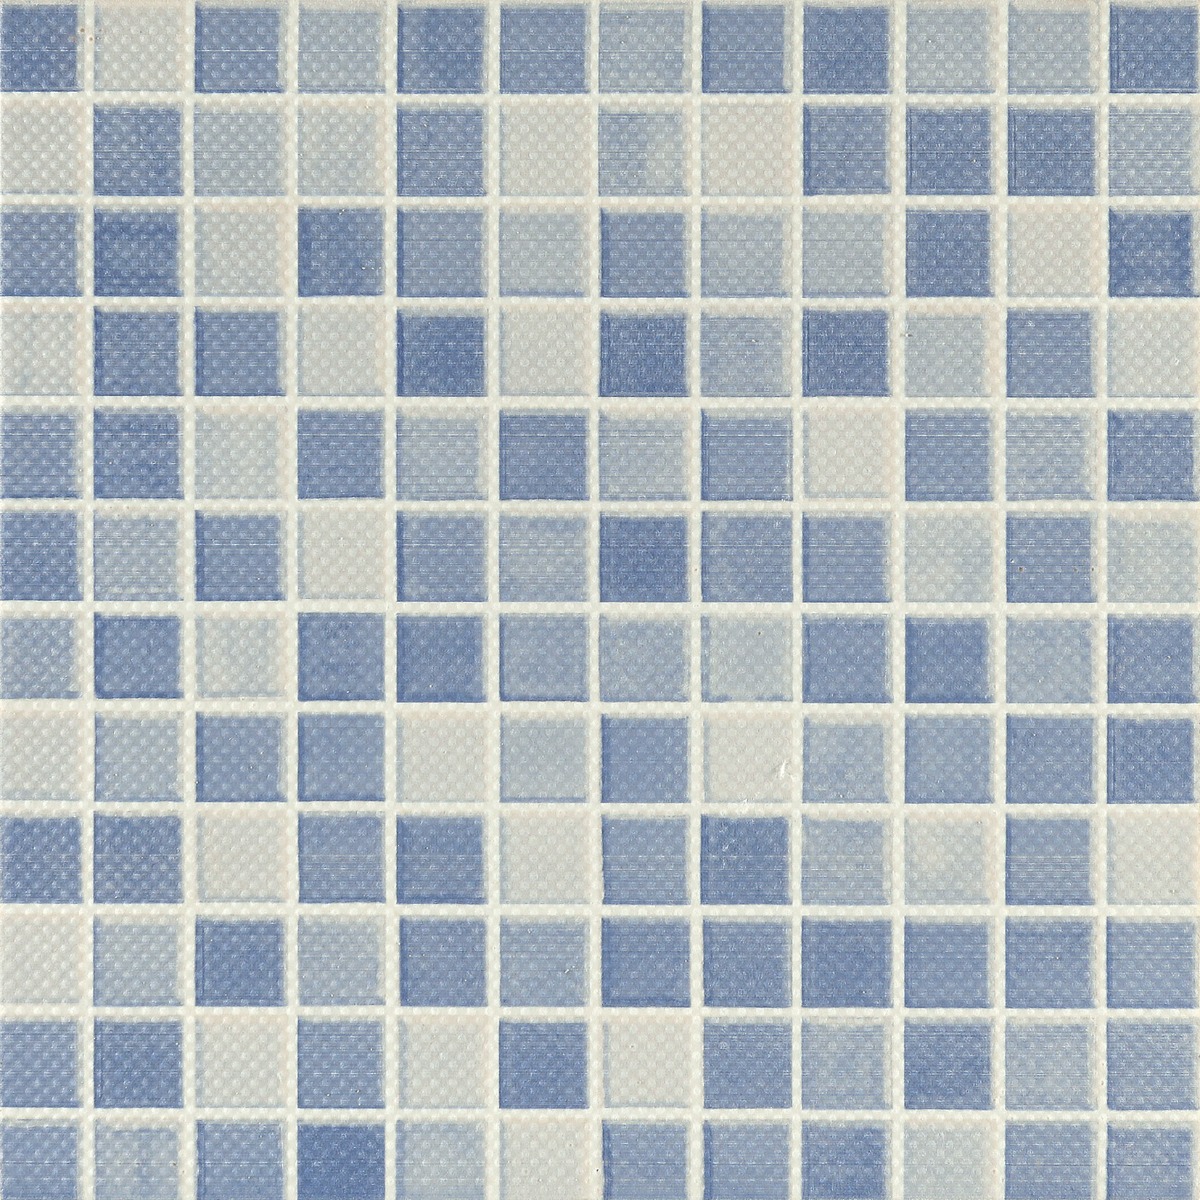 Glass Mosaic Tiles for Bathroom Tiles, Balcony Tiles, Swimming Pool Tiles, Accent Tiles, Parking Tiles, Terrace Tiles, Pathway Tiles, Hospital Tiles, High Traffic Tiles, Bar/Restaurant, Commercial/Office, Outdoor Area, Outdoor/Terrace, Porch/Parking